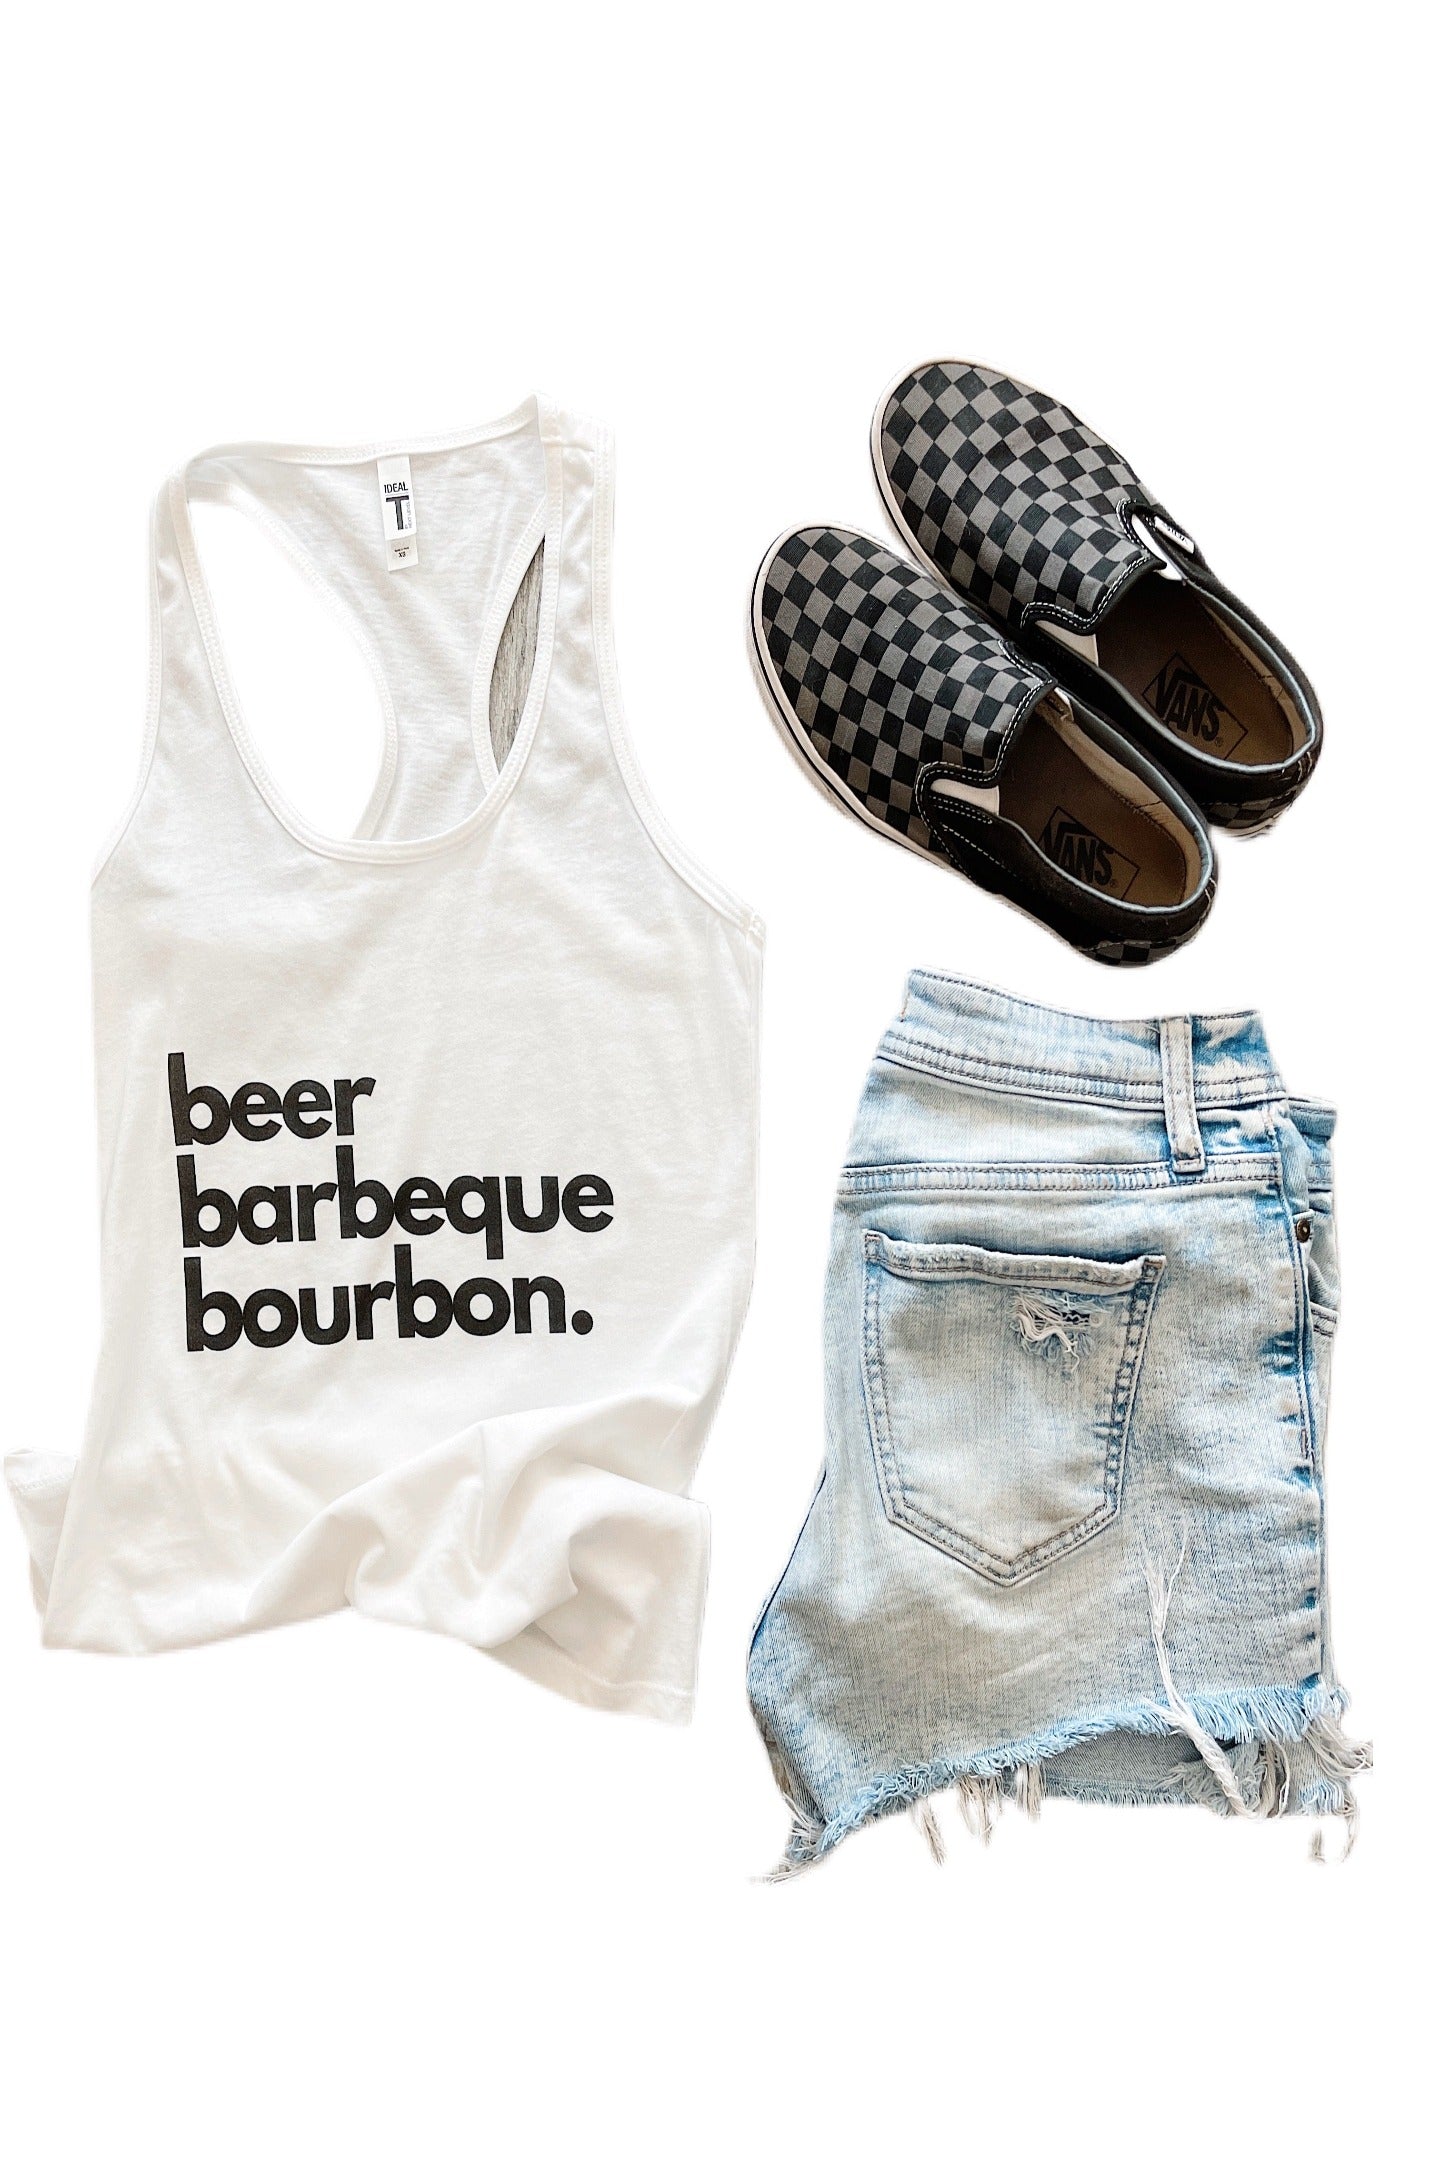 Beer BBQ and Bourbon Tank